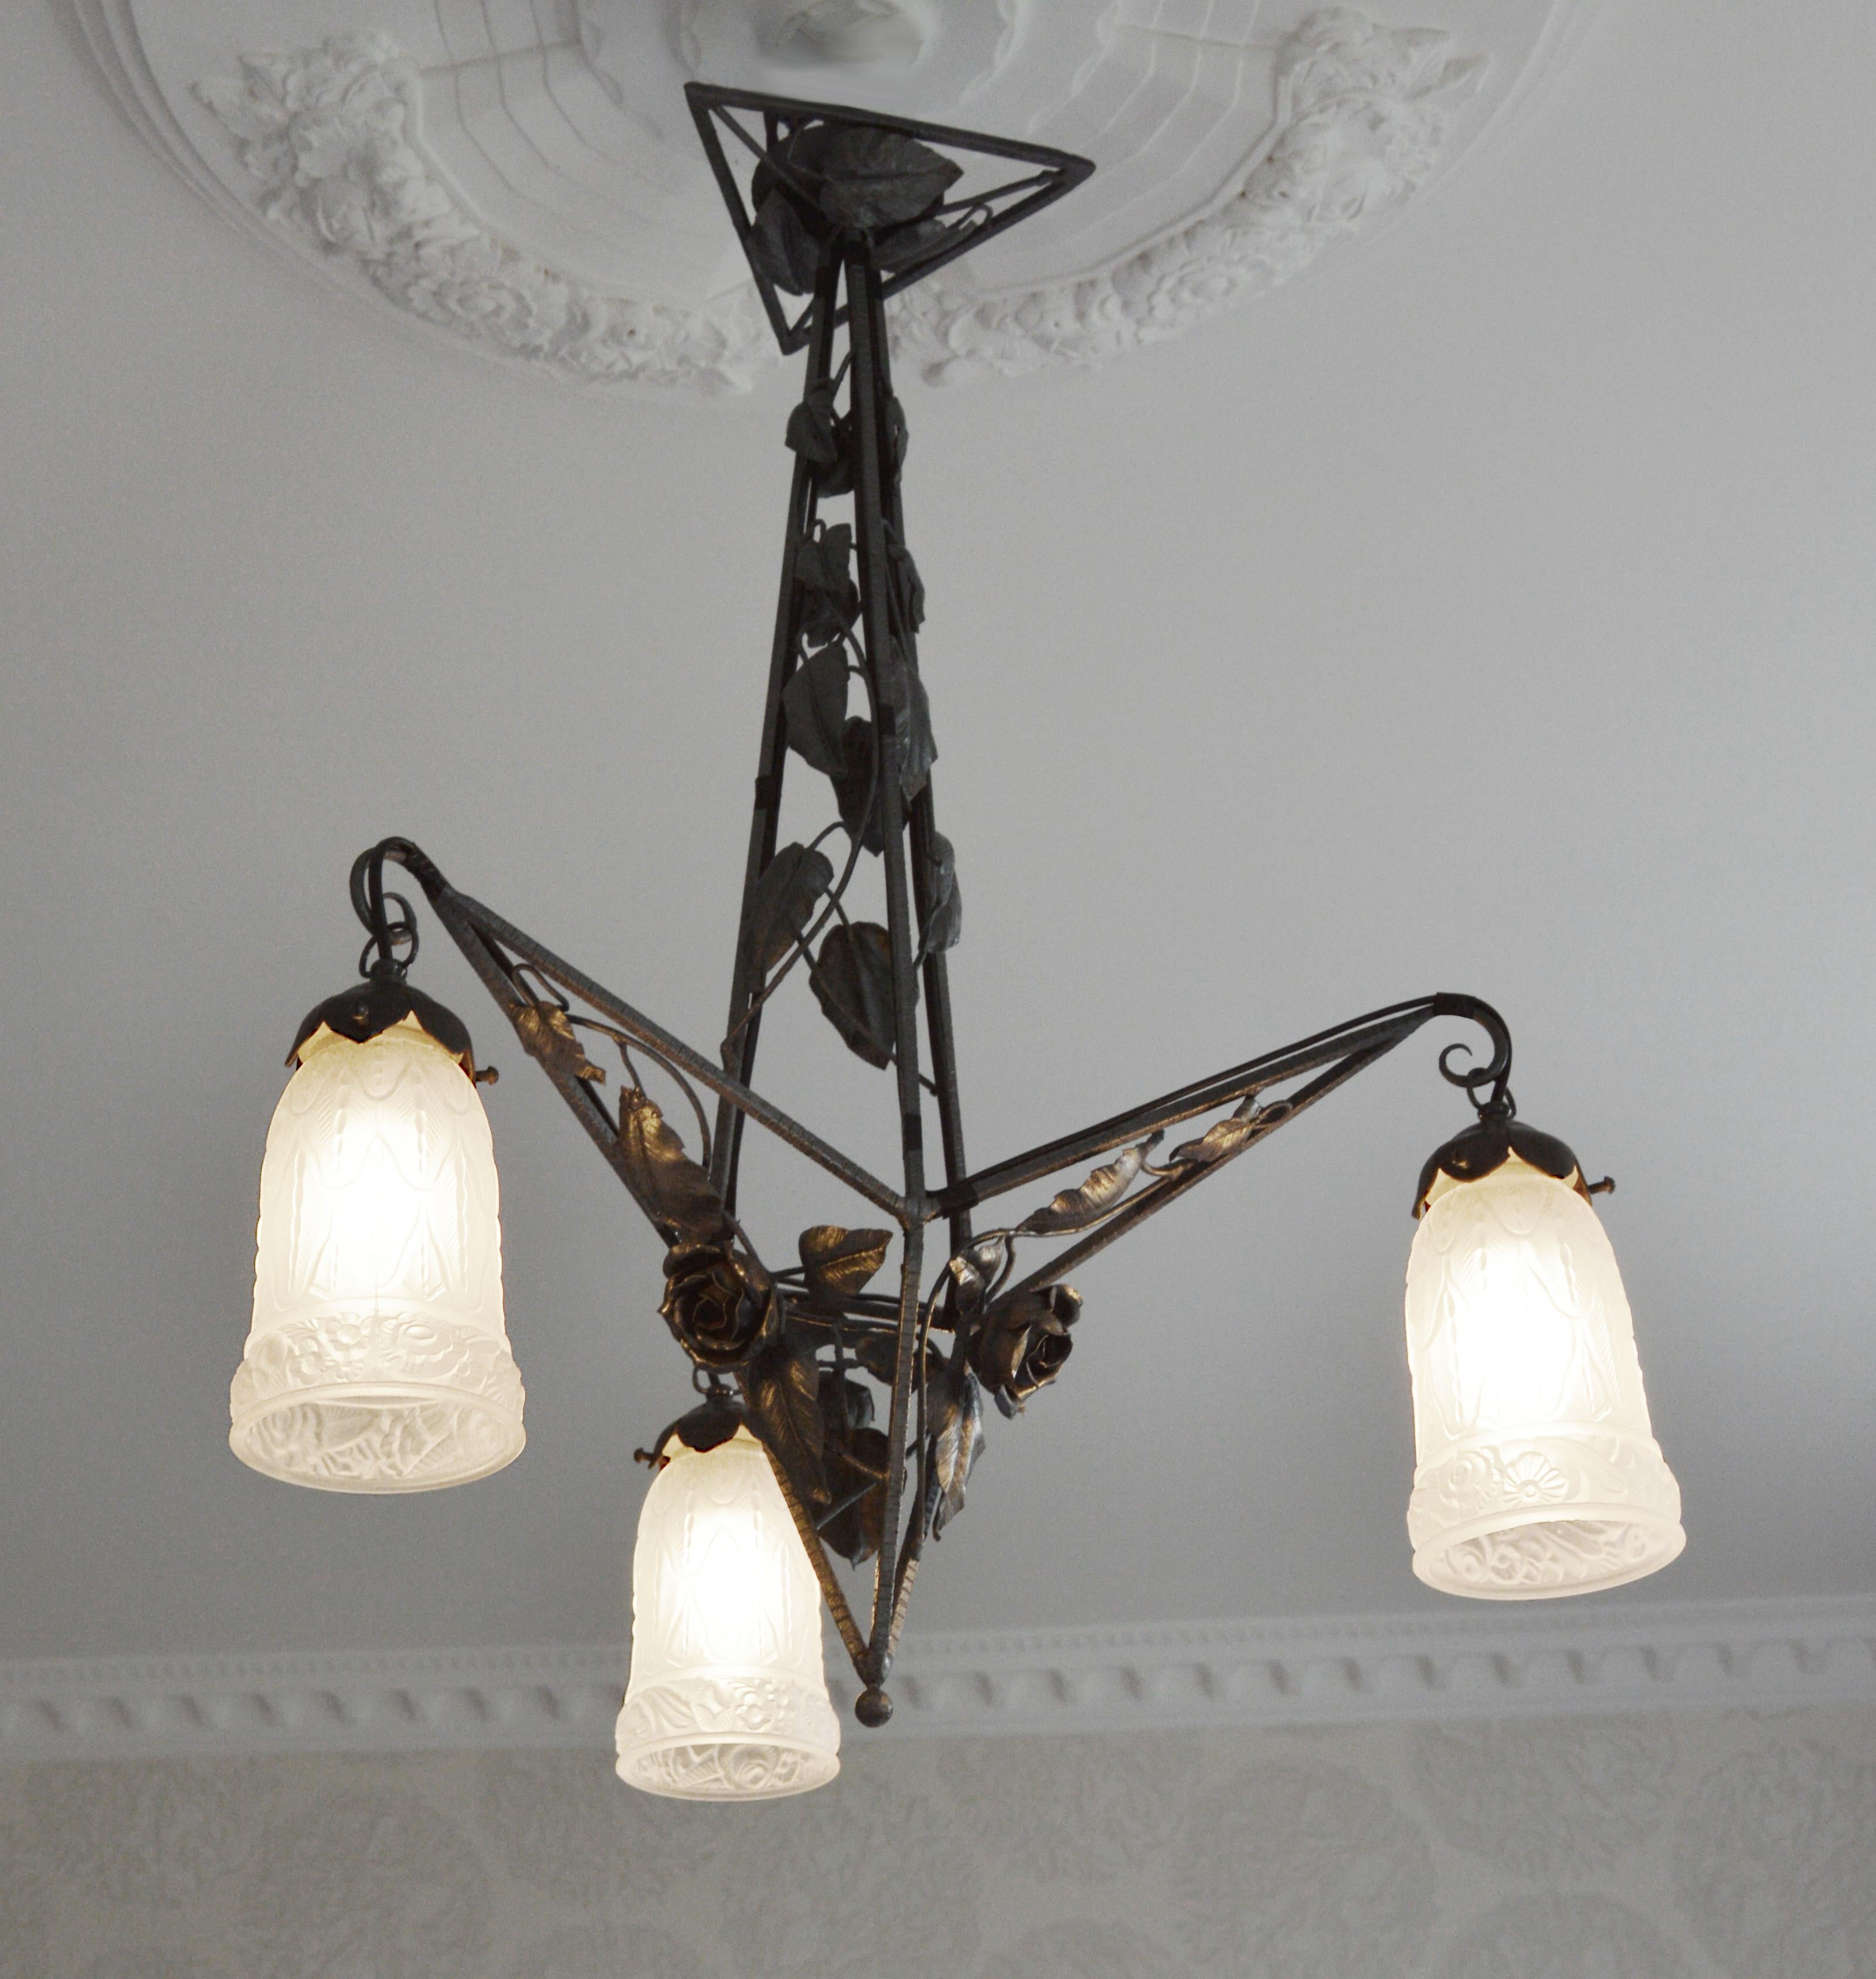 Glass Petitot French Art Deco Wrought-Iron Chandelier, 1925 For Sale